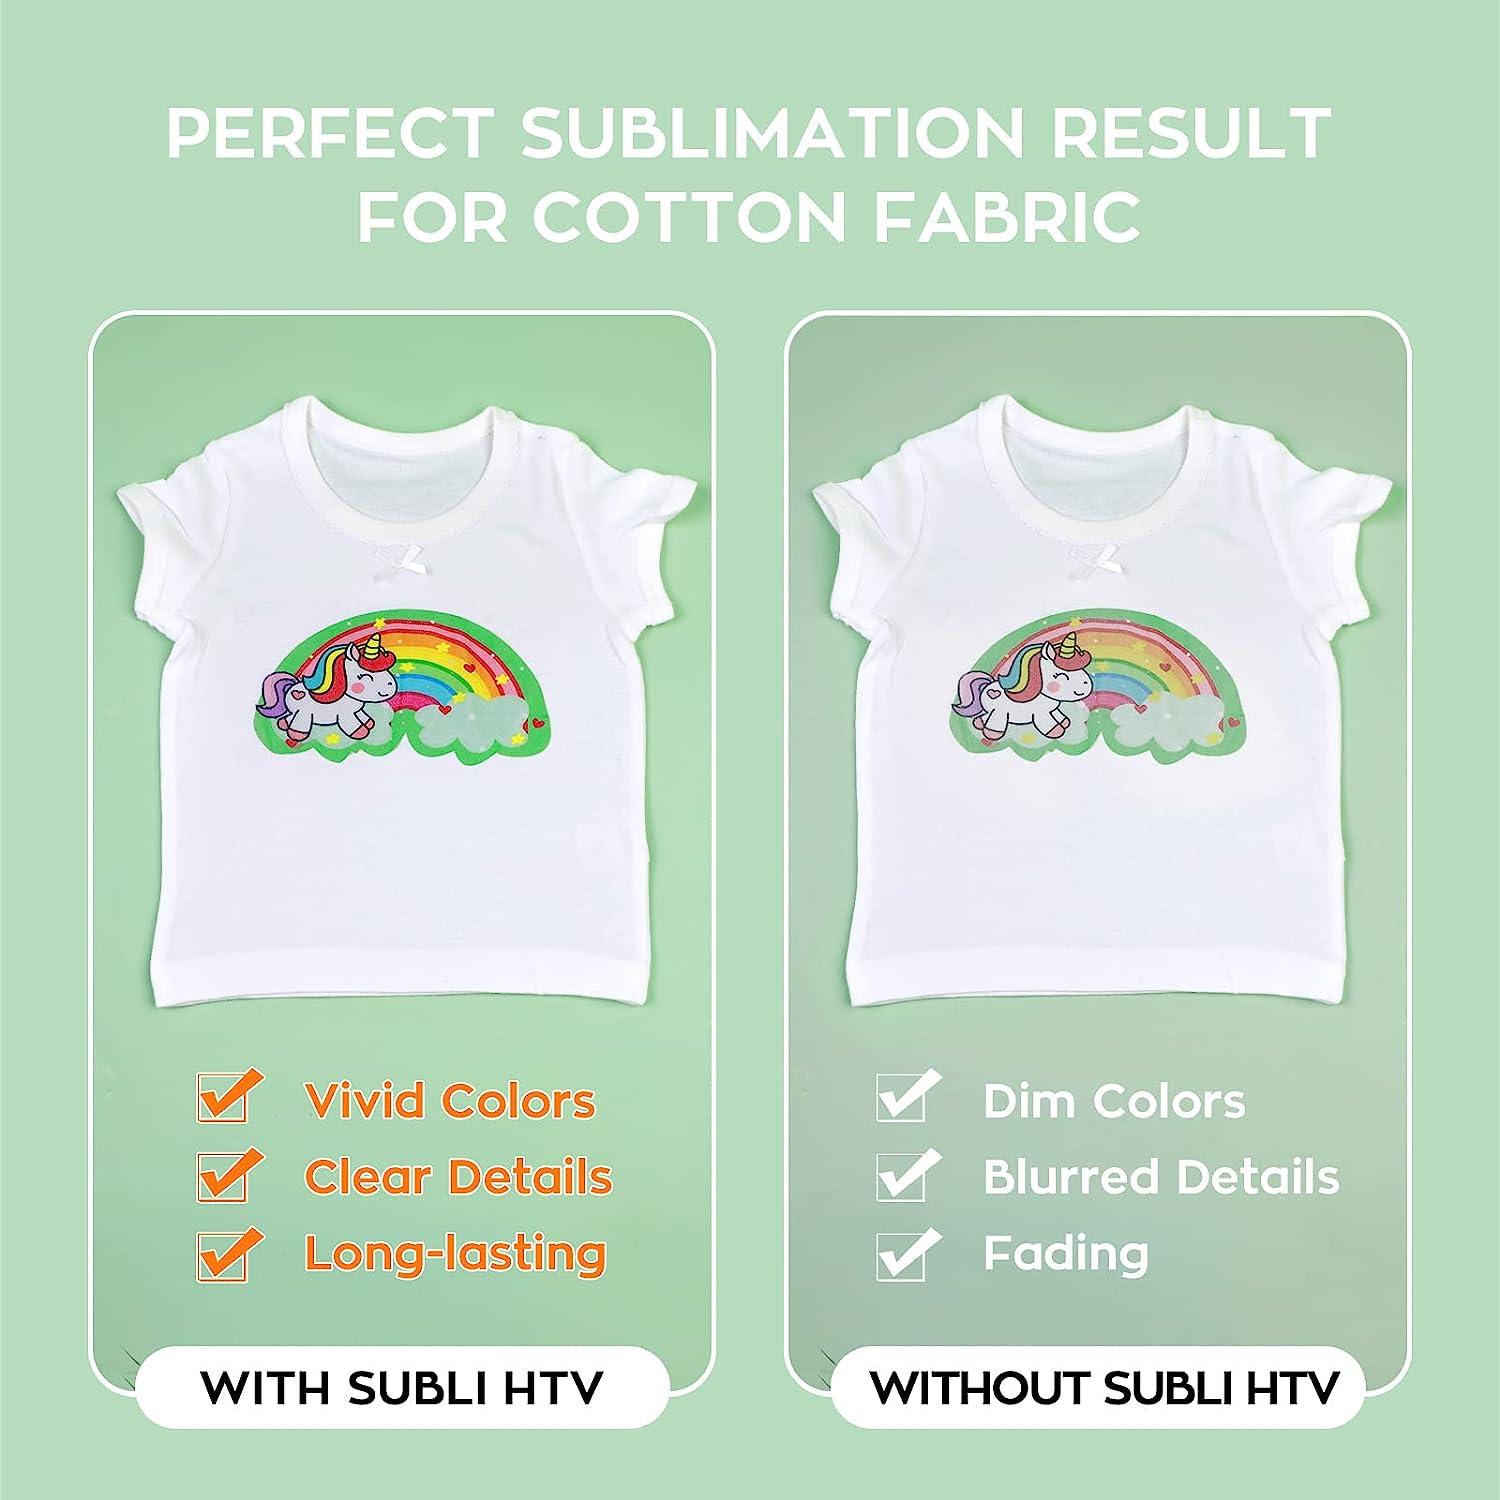 HTVRONT Clear HTV Vinyl for Sublimation - 12 X 5FT Upgraded Matte  Sublimation Vinyl - Wash Durable Clear Dye Sub HTV for Light-Colored Cotton  Fabric Matte 5FT